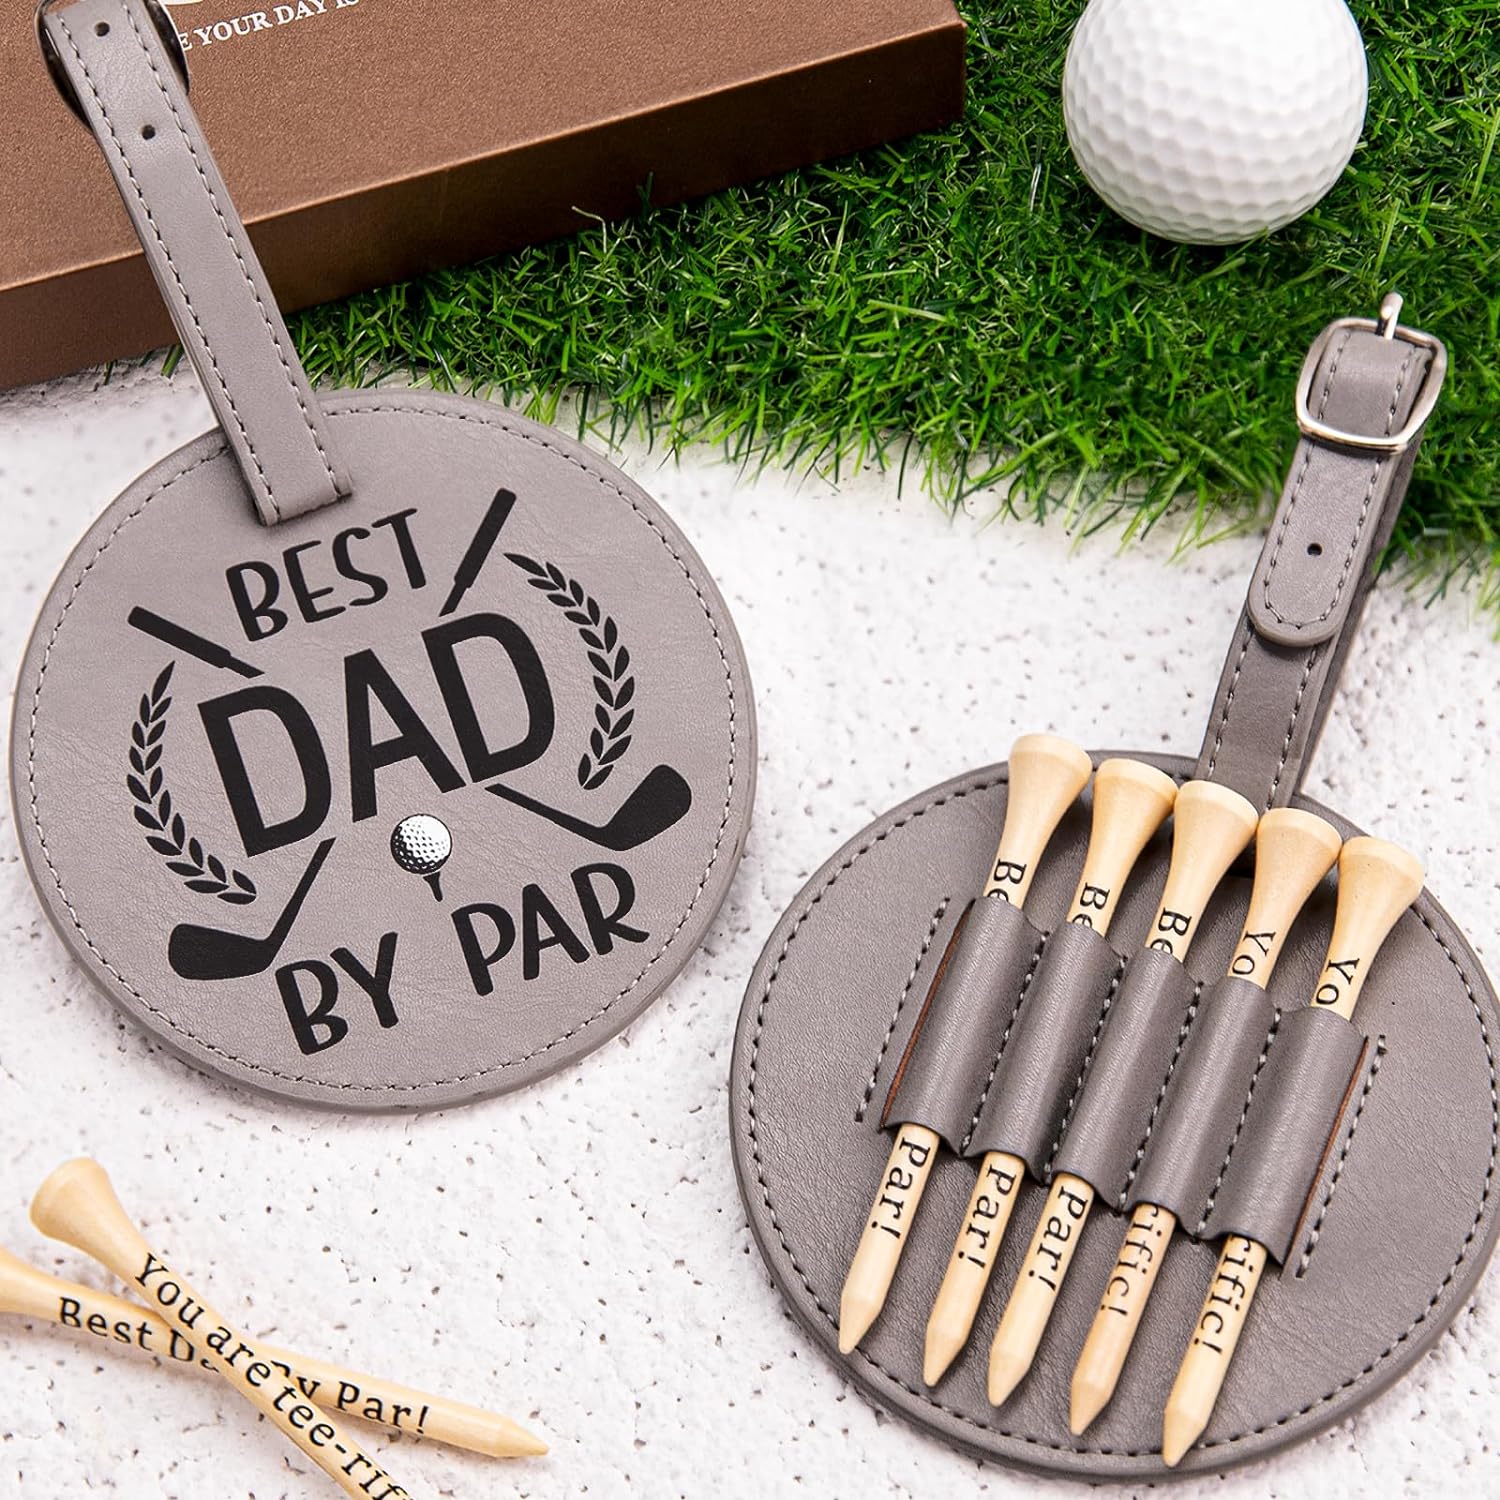 Dad Golf Bag Tag with 5 Tees Set "Best Dad by Par" 3-1/4" $6.39 & More + Free Ship w/Prime or on orders $35+